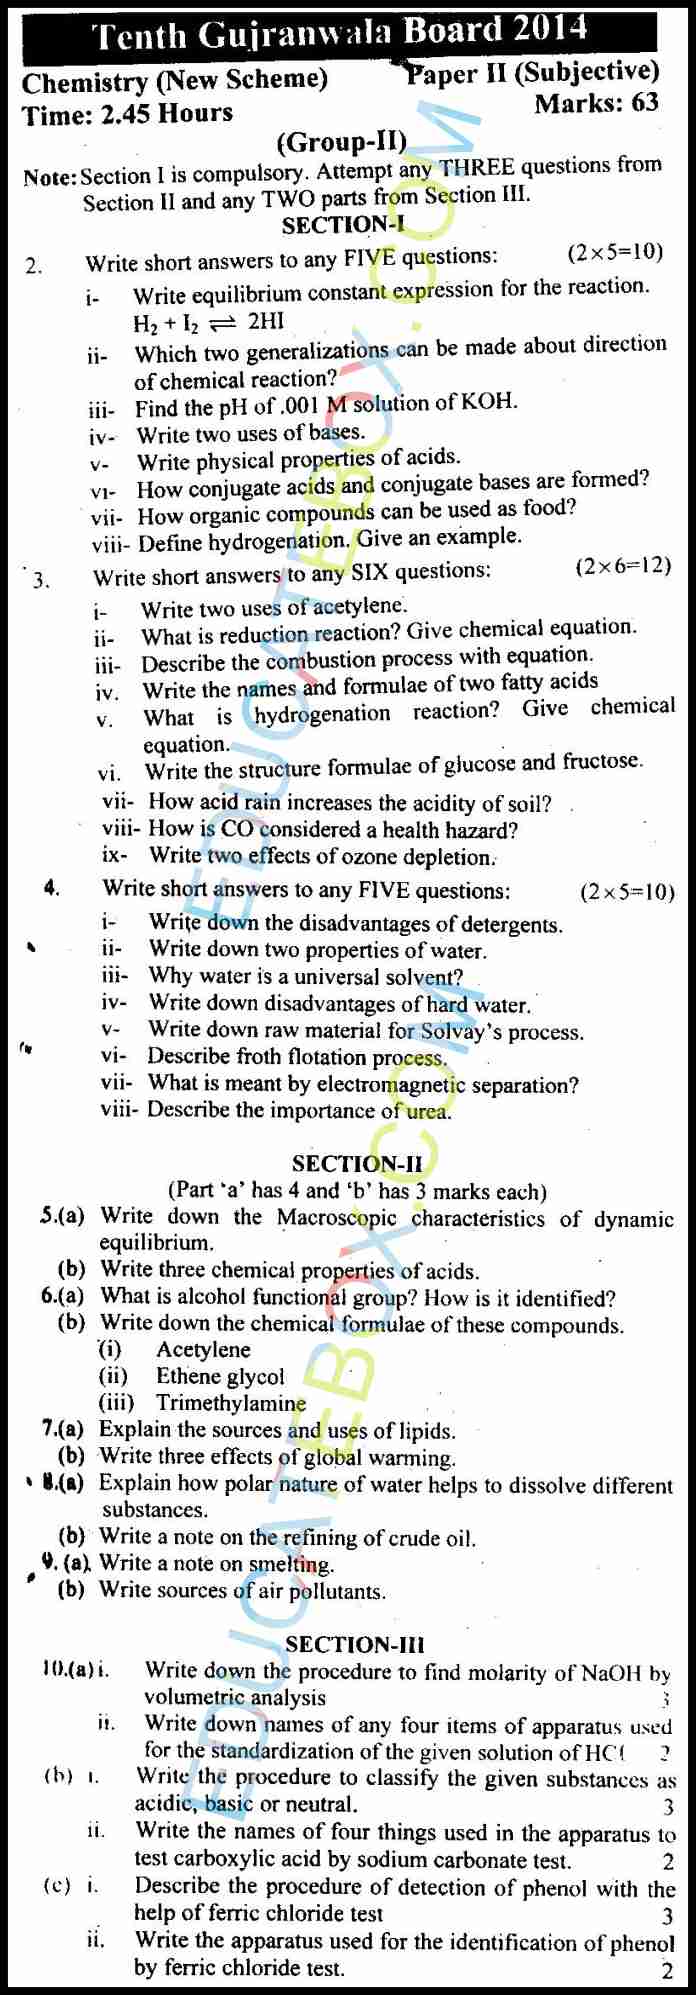 Past Paper Class 10 Chemistry Gujranwala Board 2014 Subjective Type Group 2